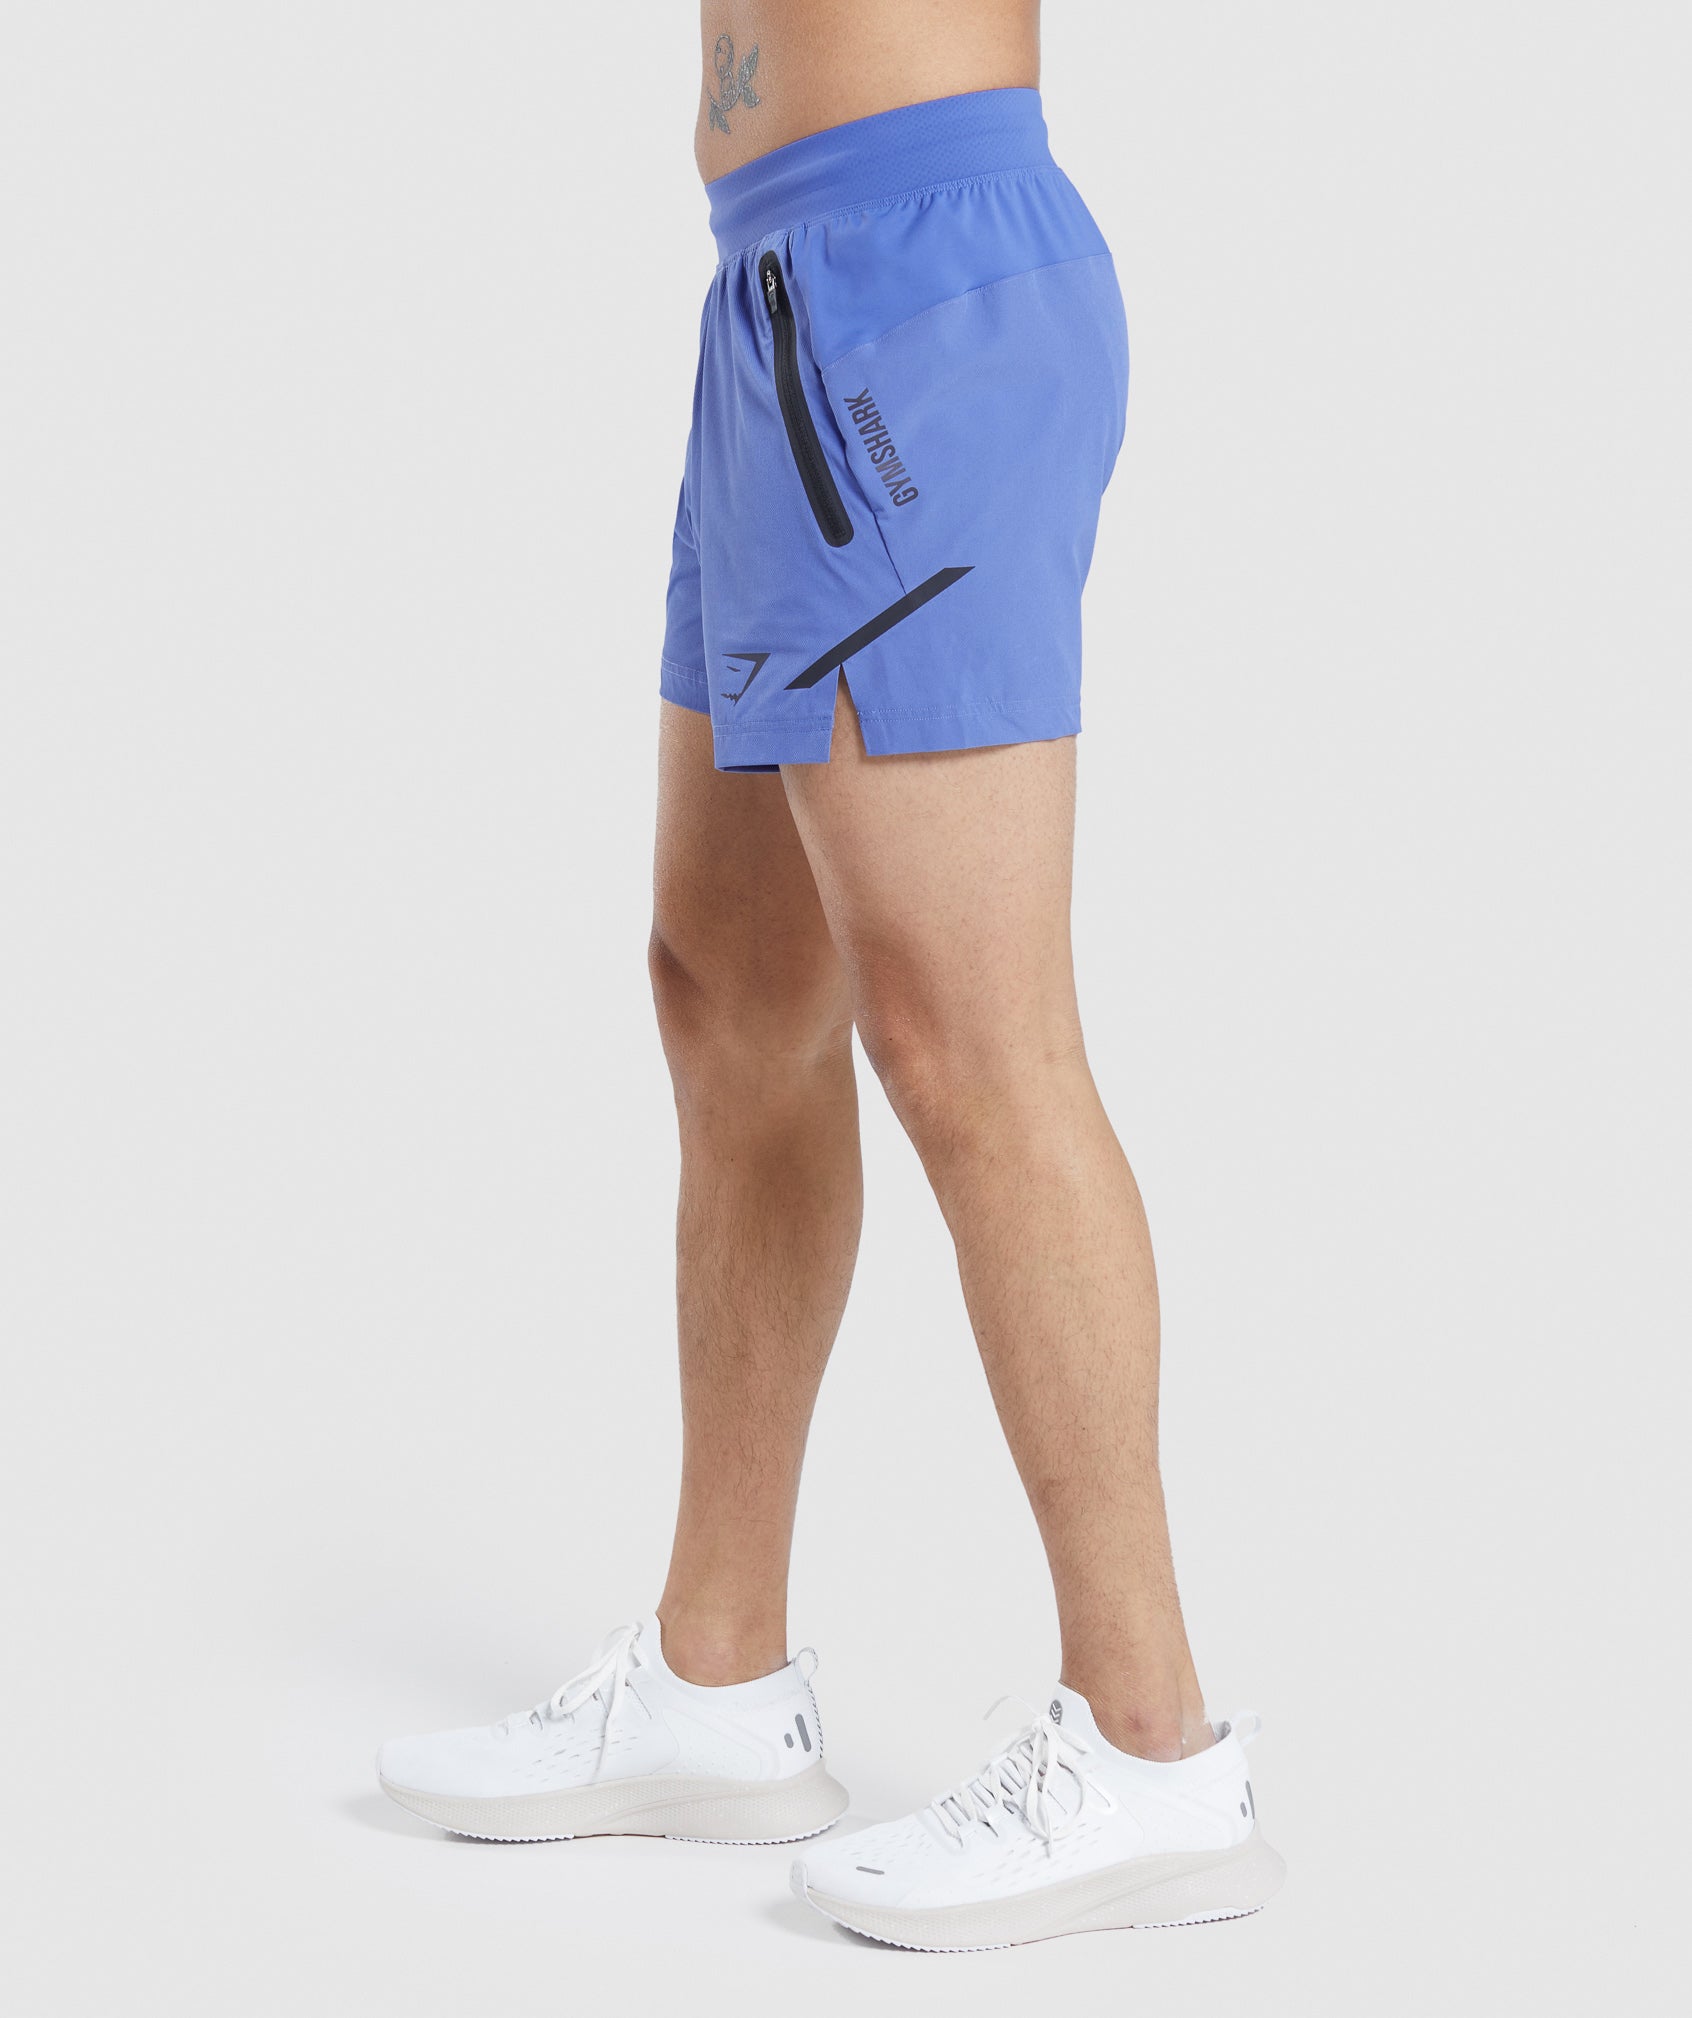 Apex 5" Perform Shorts in Court Blue